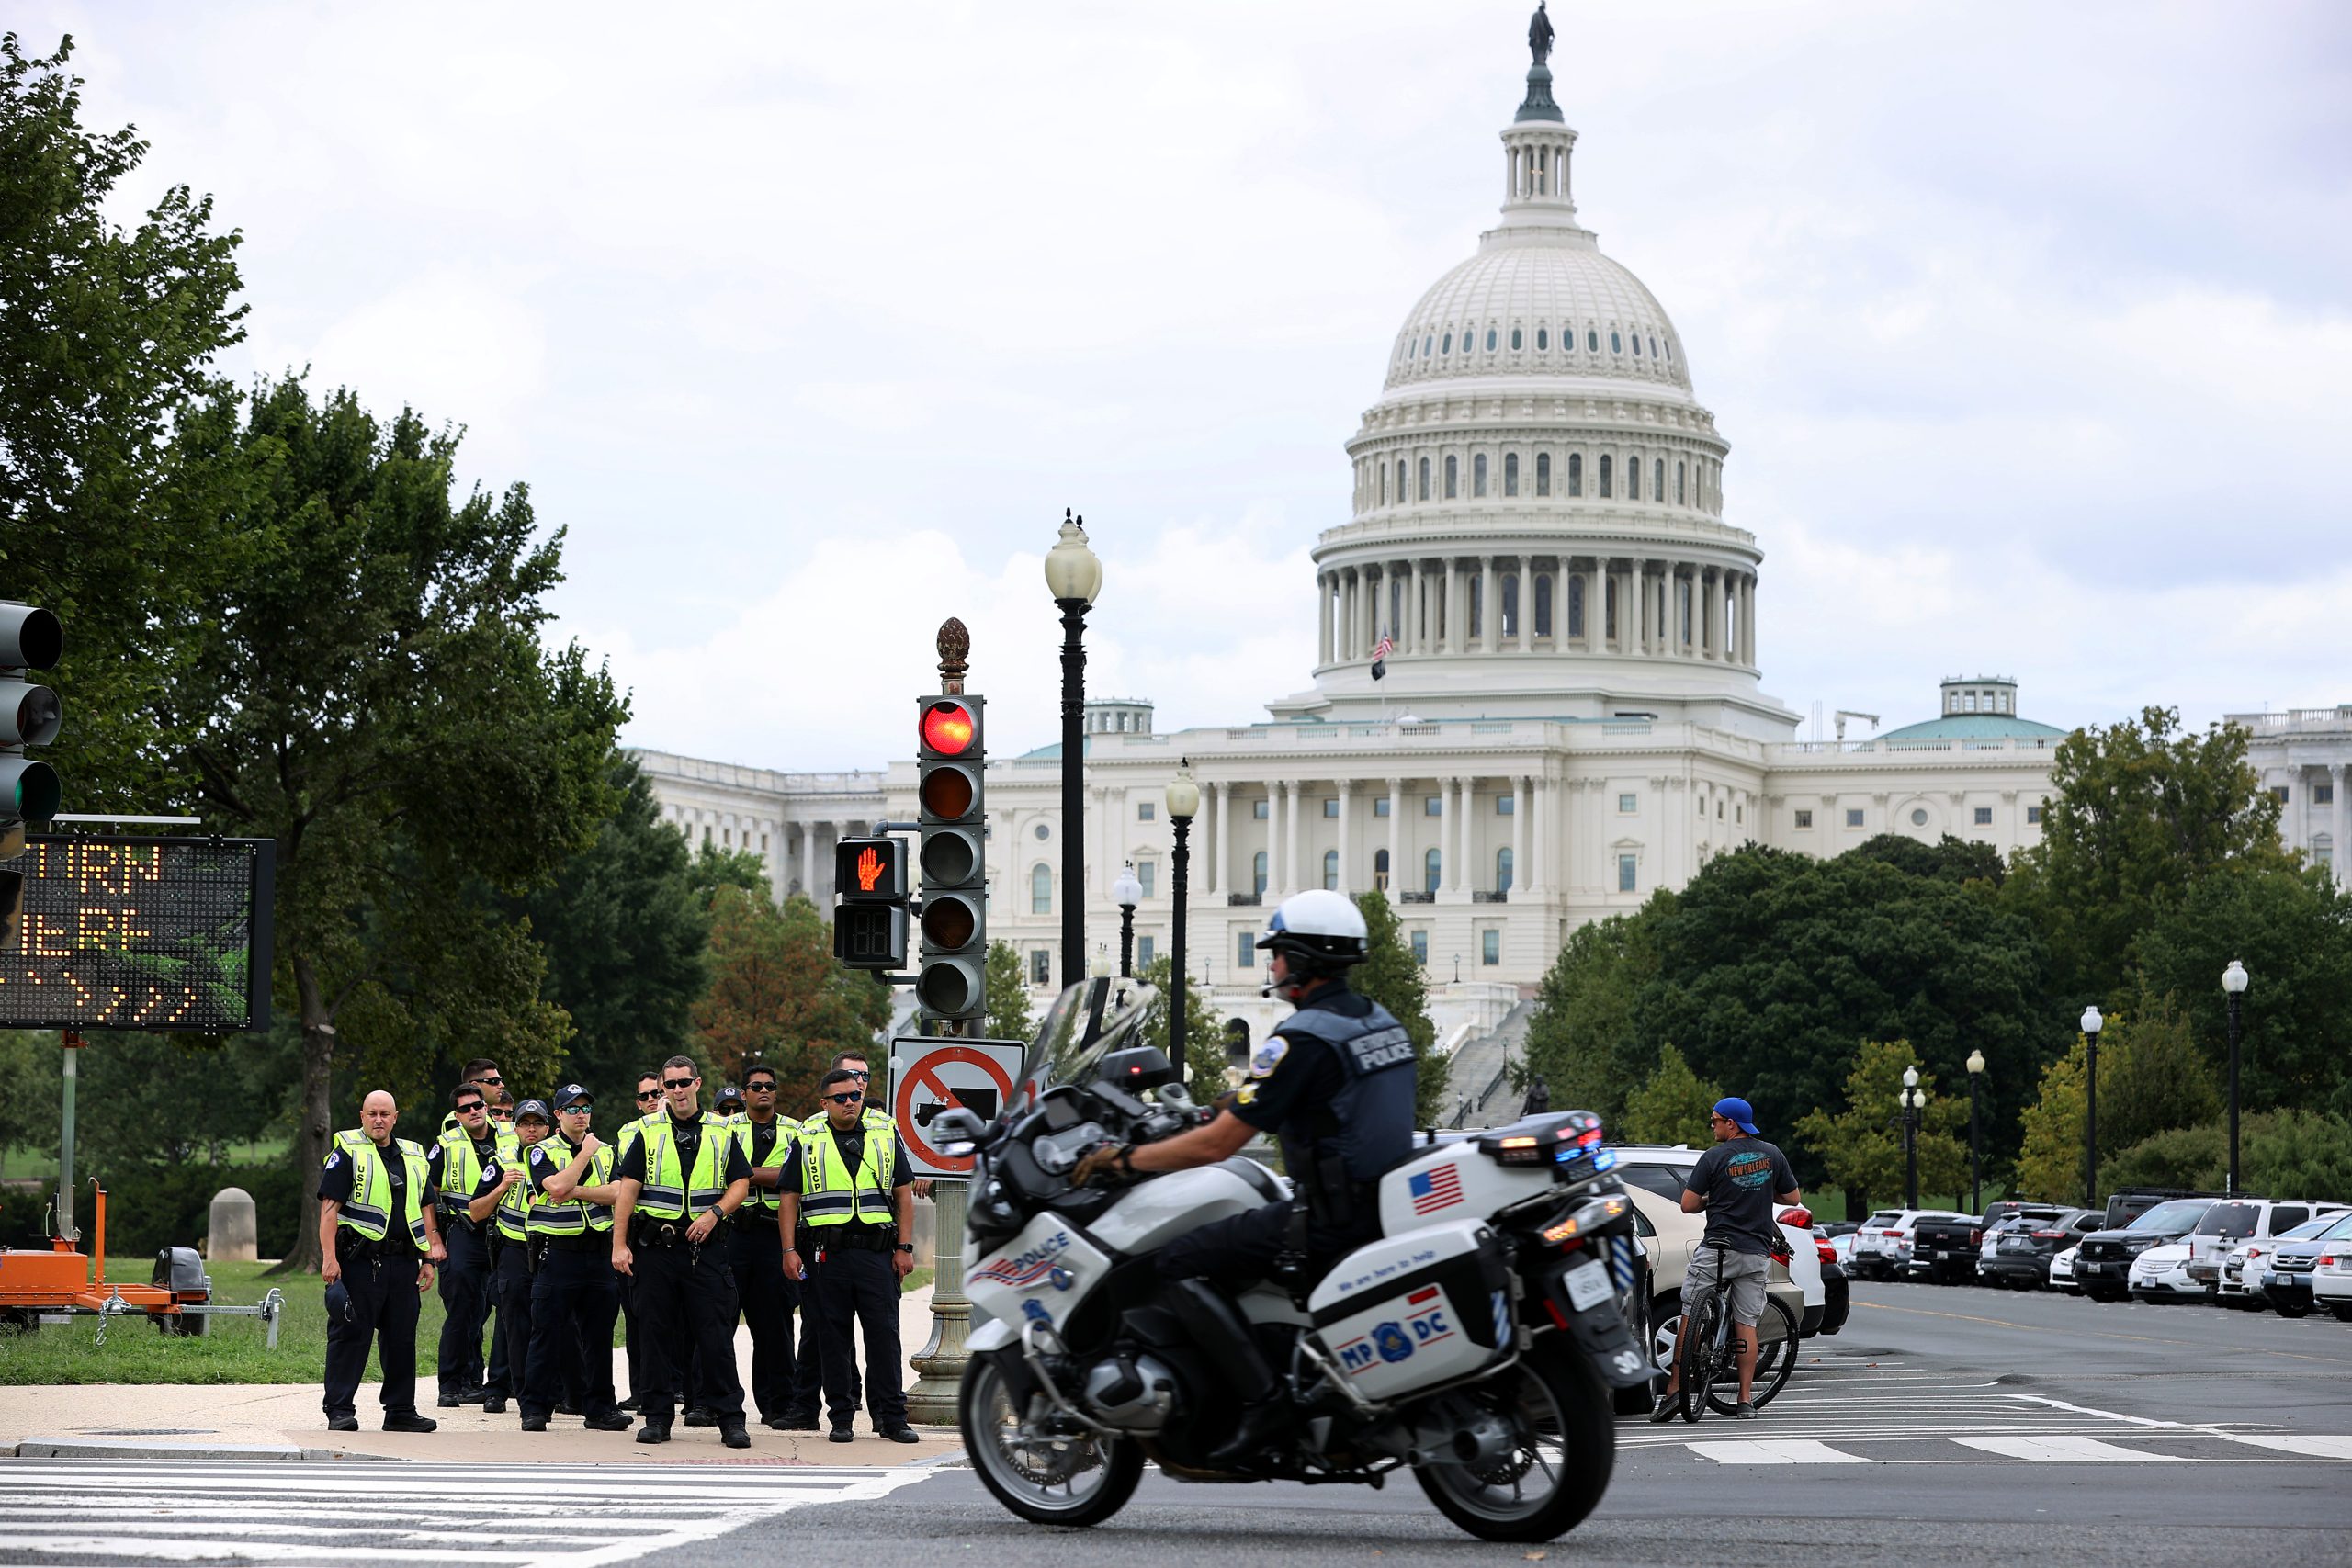 Law enforcement agencies rush to assess new threats to lawmakers